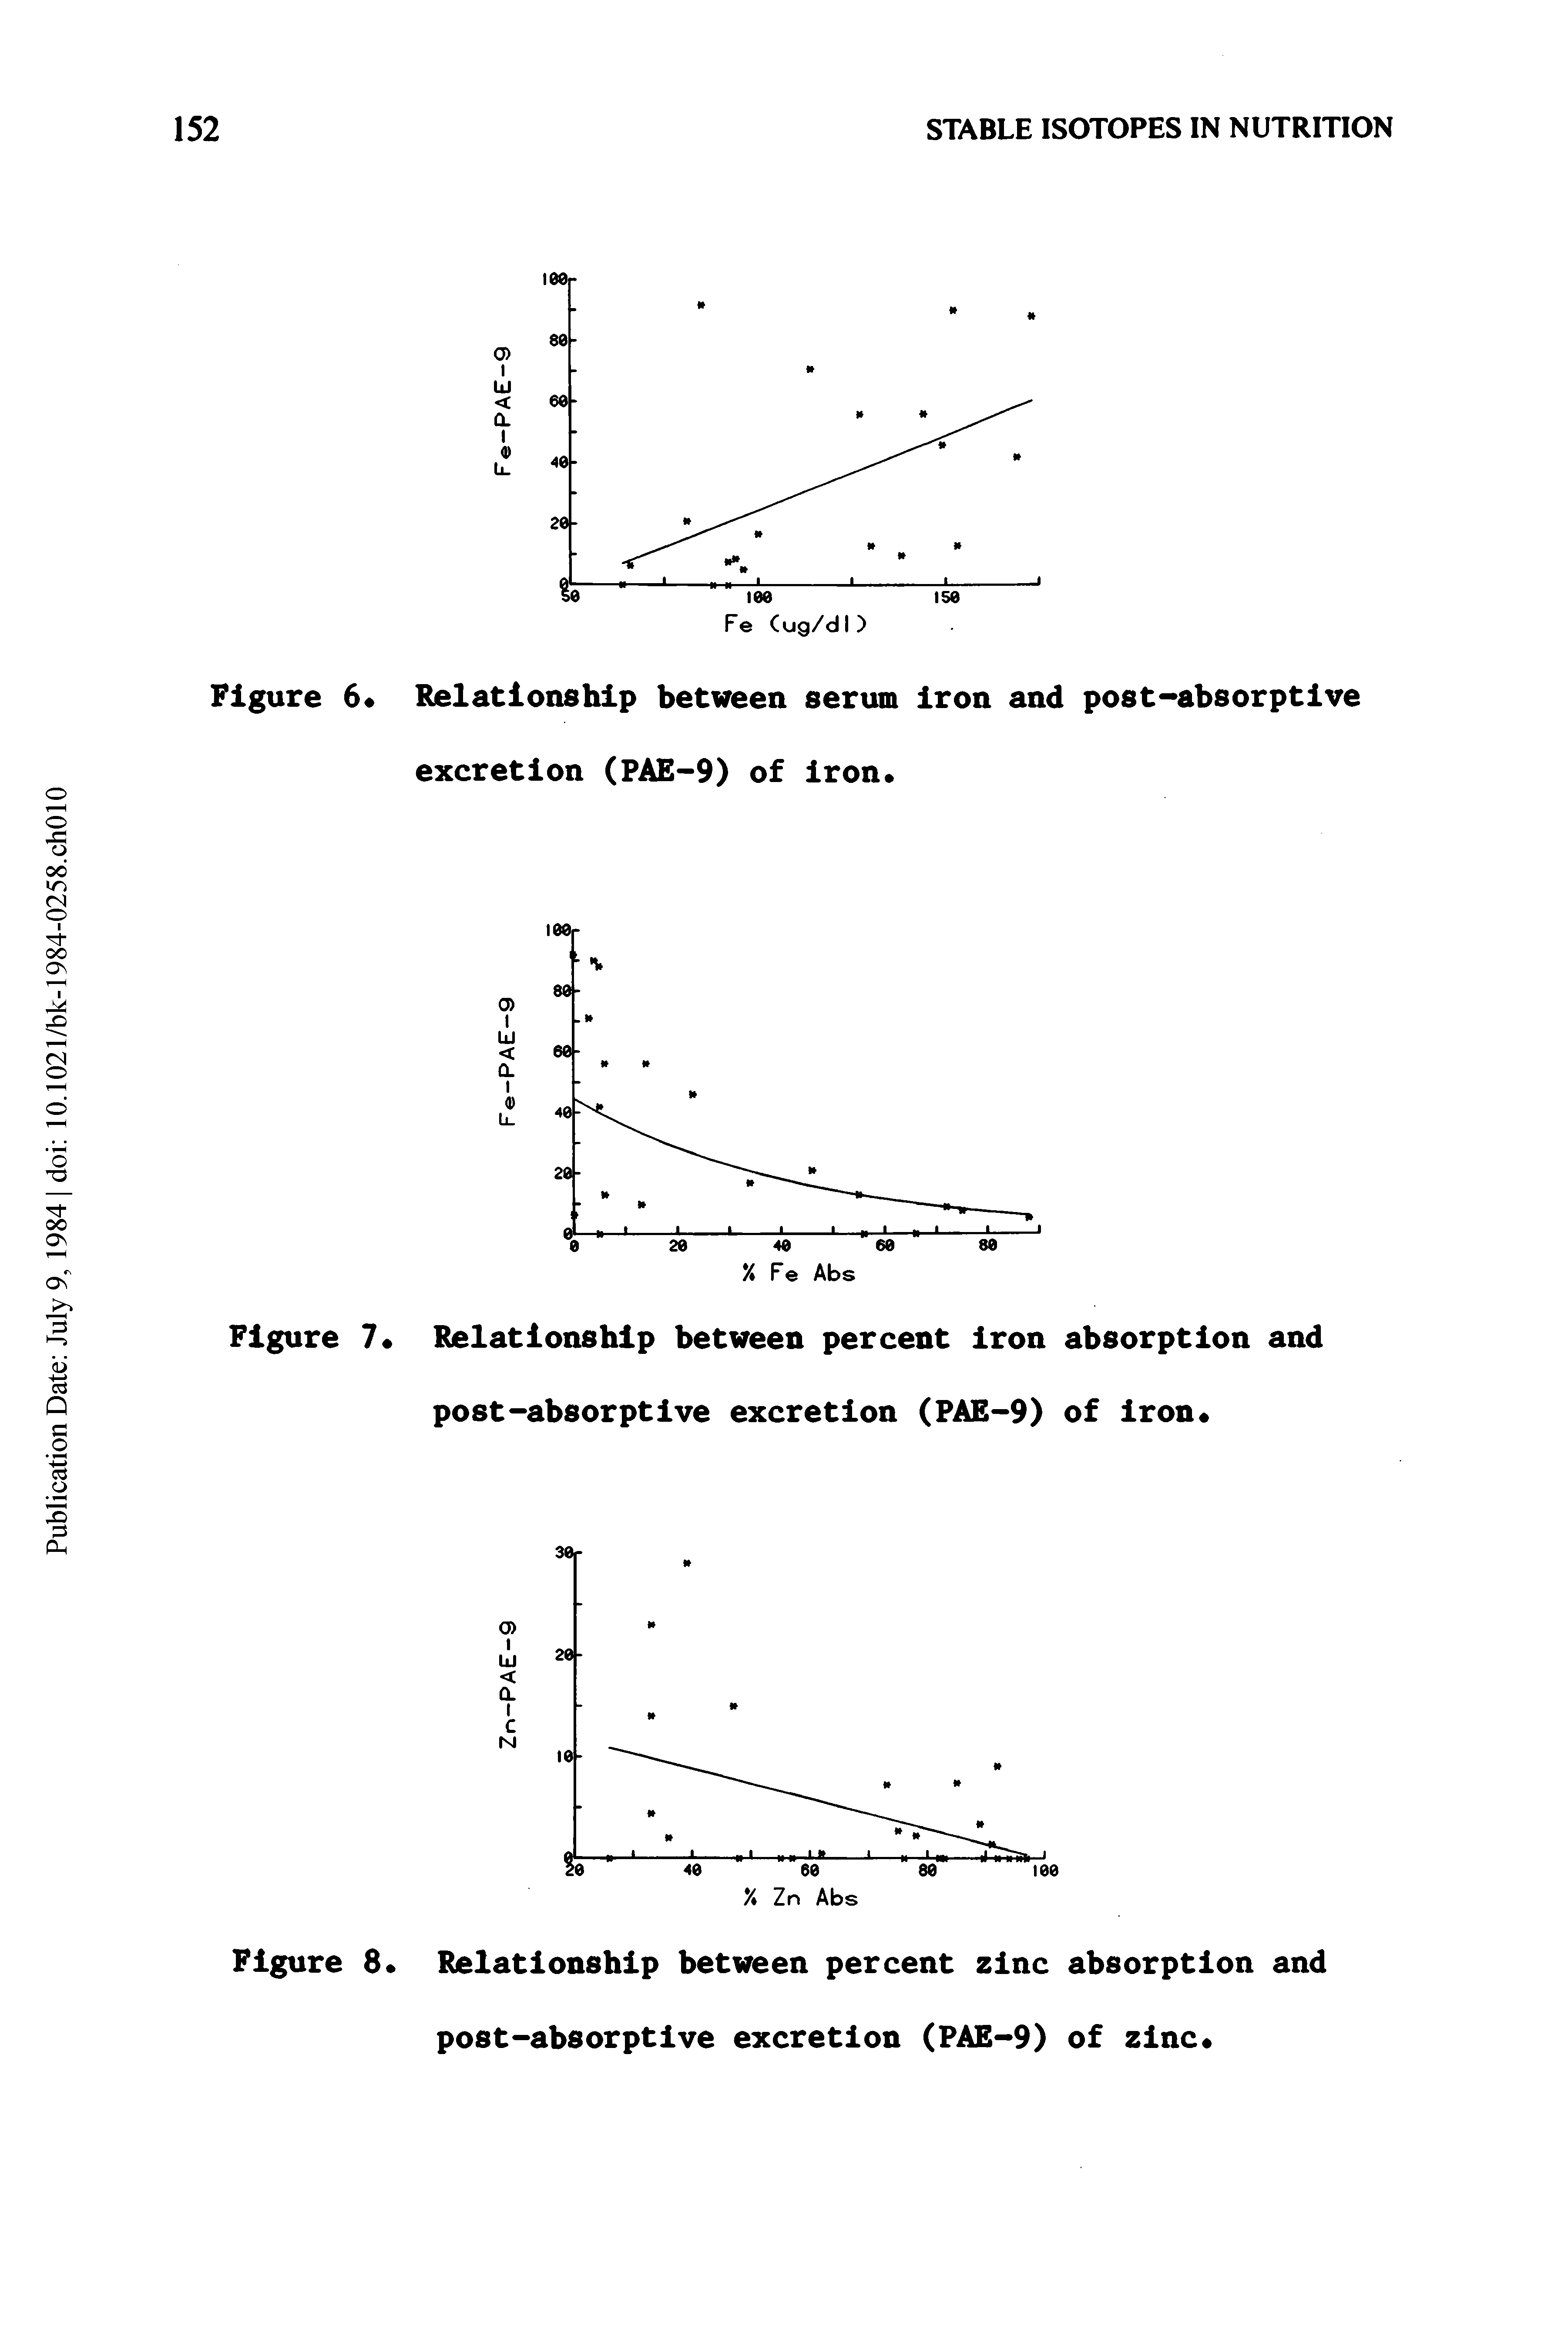 Figure 6 Relationship between serum Iron and post-absorptive excretion (PAE-9) of iron.